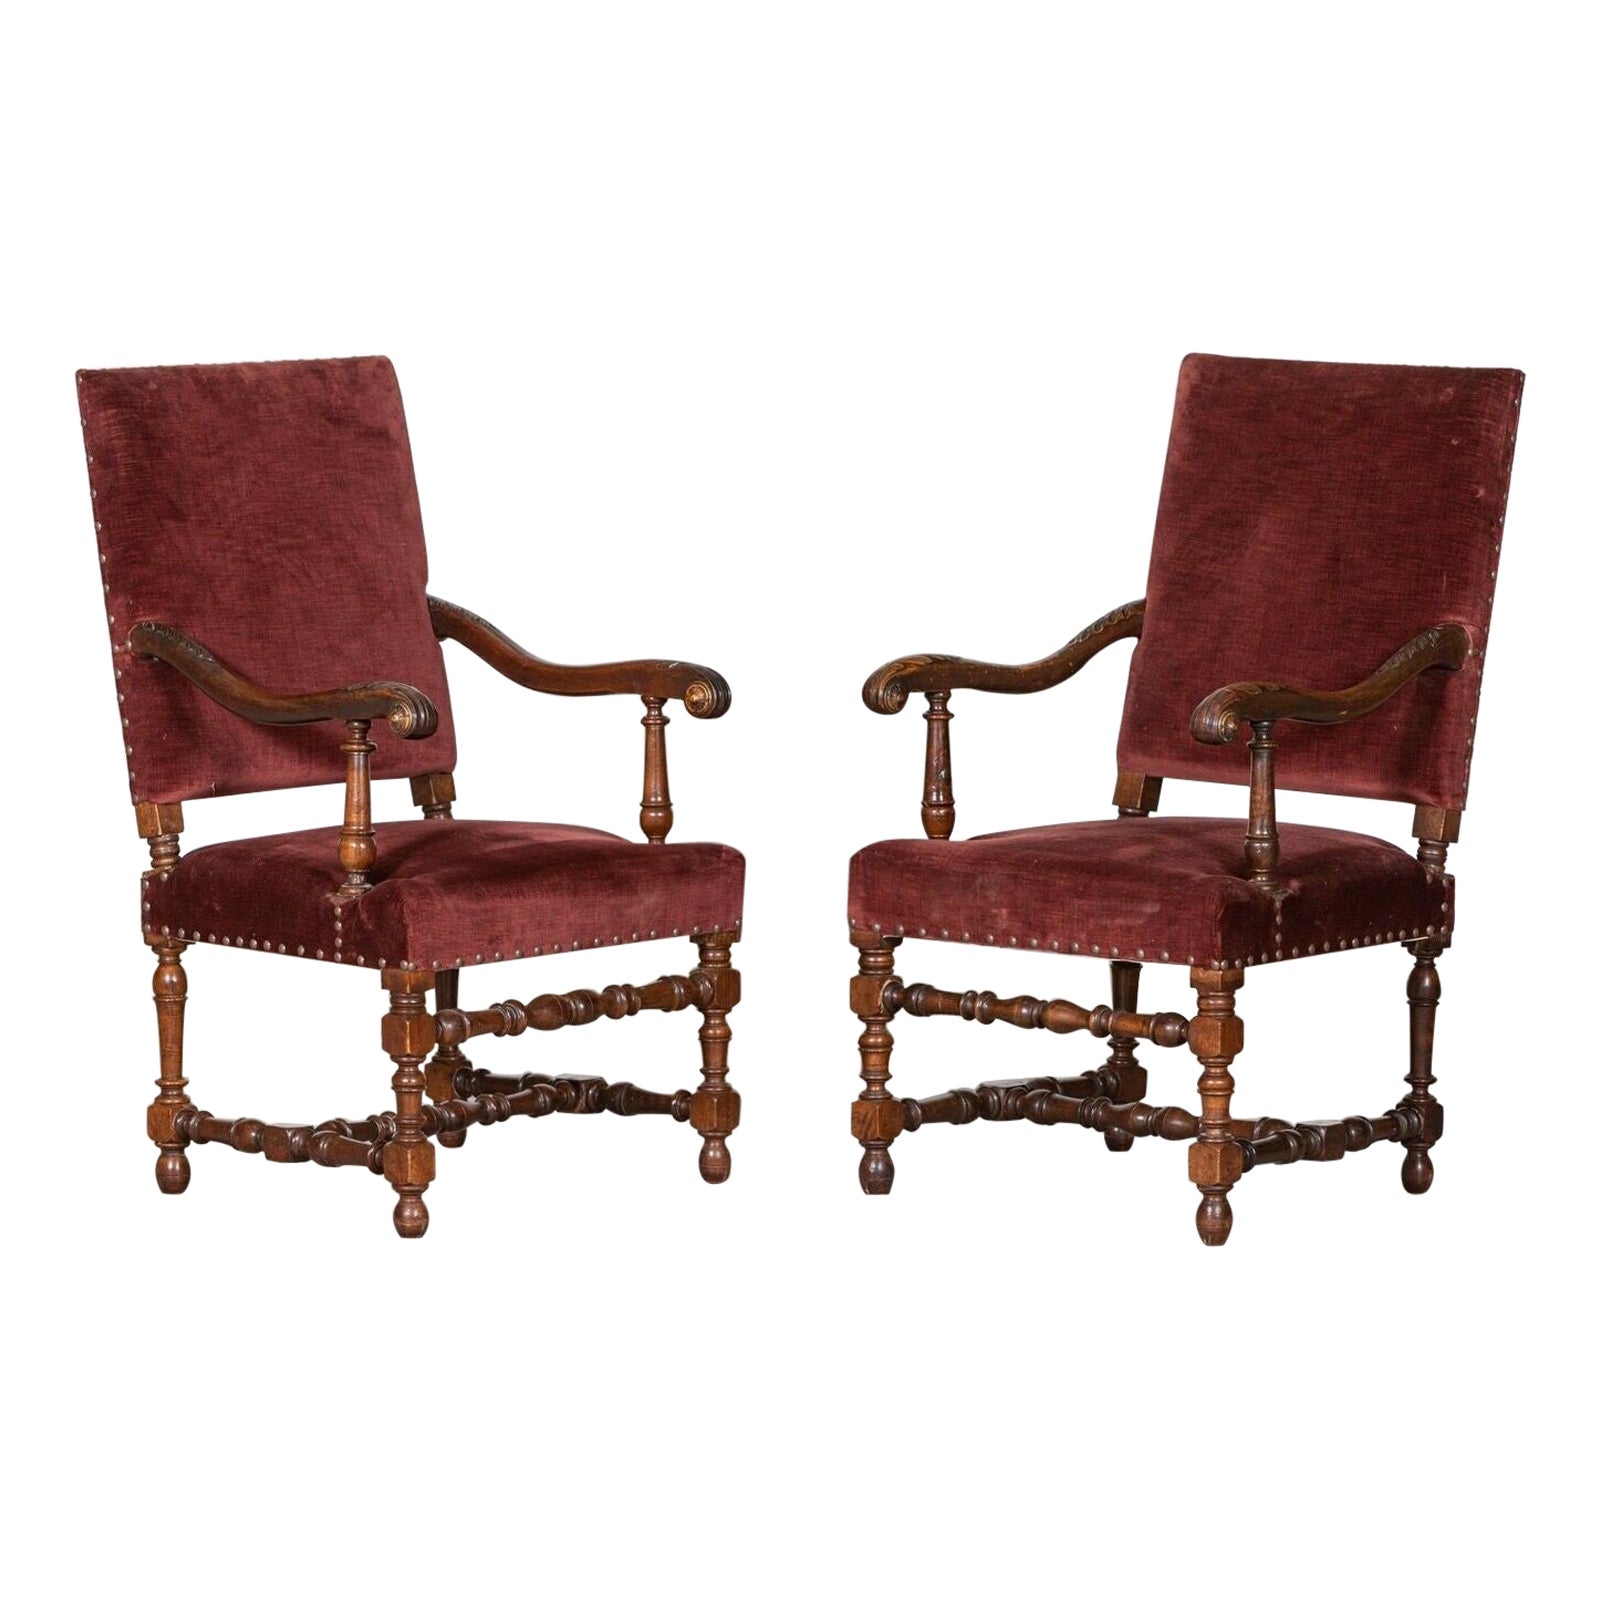 Nr Pair 19thC French Walnut Library Chairs